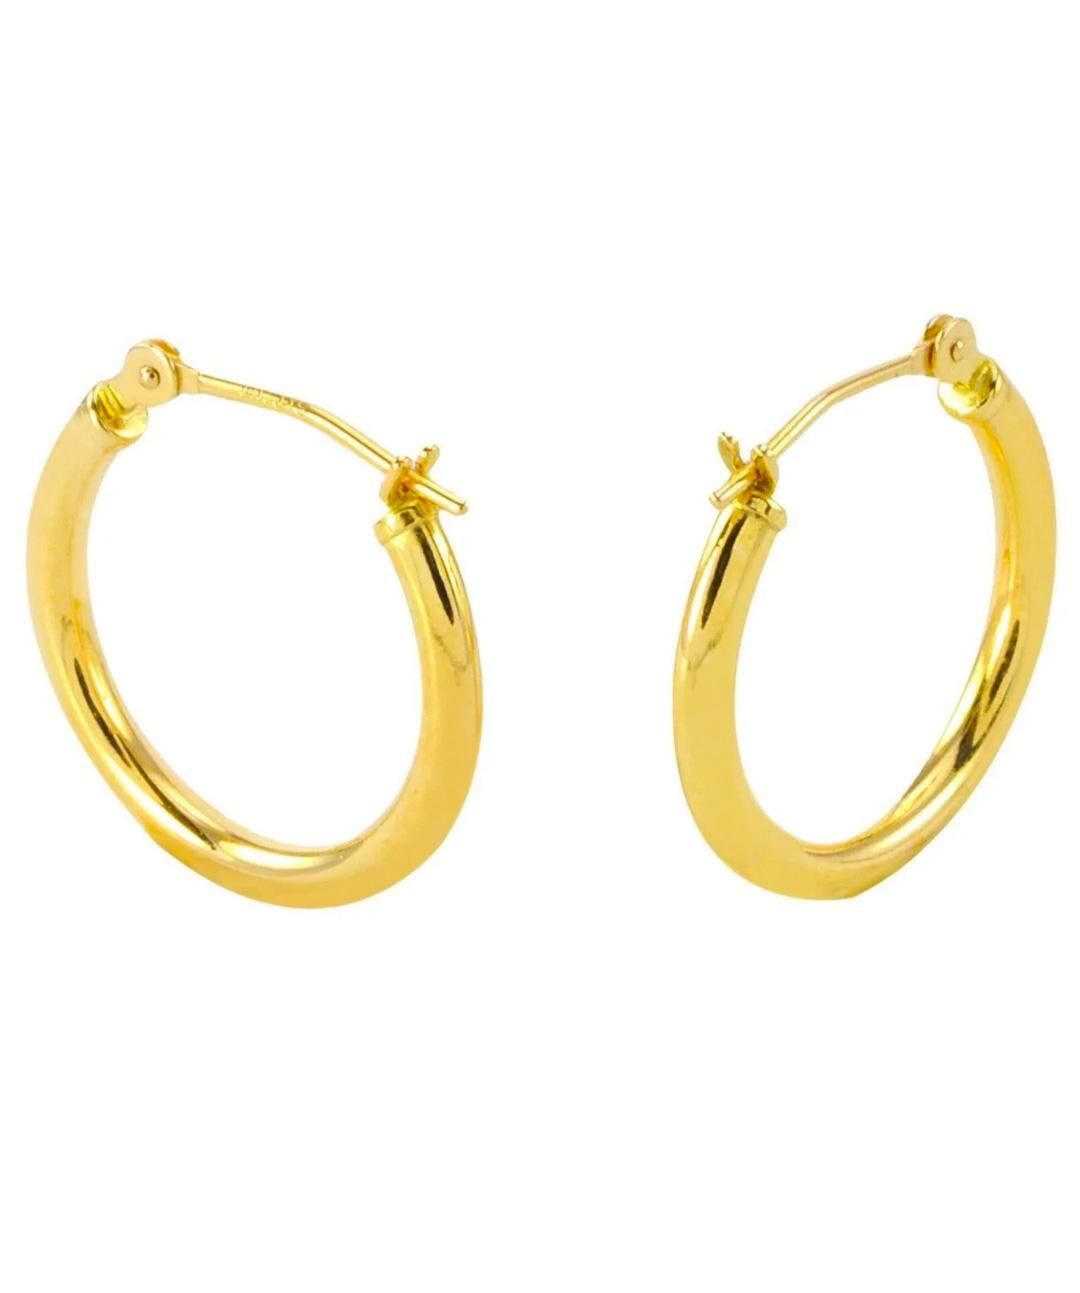 14K YELLOW GOLD HOOP EARRINGS 18.5MM MEDIUM LATCH POST HOOPS
 
Everyday perfection: Classic and Trendy 14K Yellow Gold Round Shiny Hoop Earrings.
Complete your jewelry collection with a gorgeous pair of 14K gold hoop earrings. These earrings are a